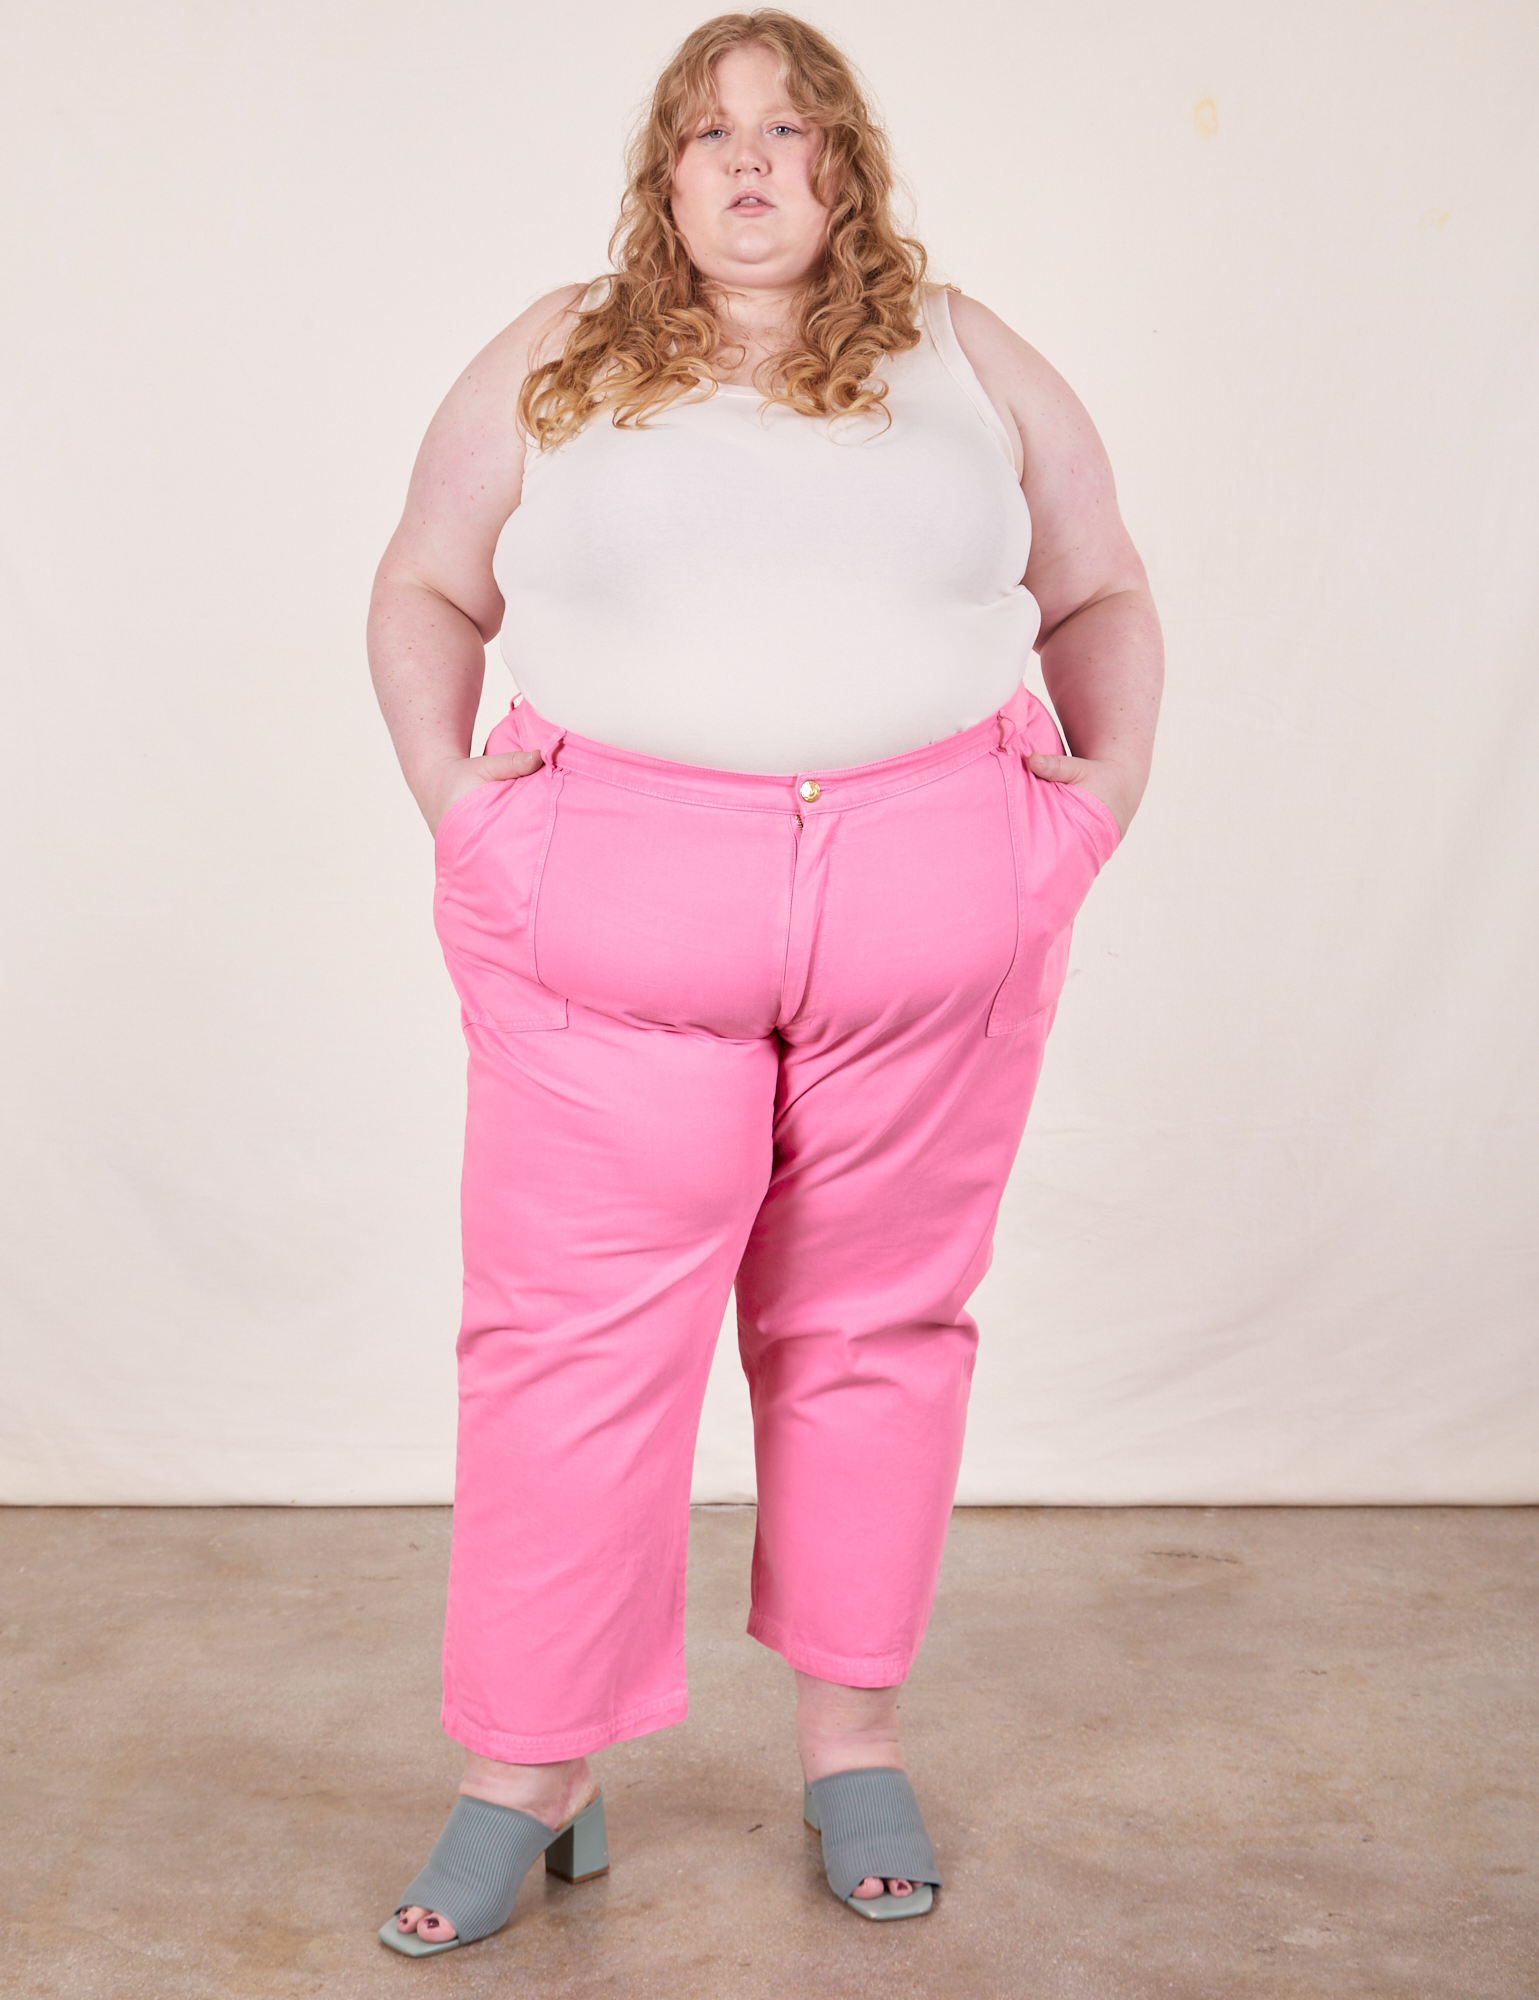 Catie is 5&#39;11&quot; and wearing size 5XL Work Pants in Bubblegum Pink paired with vintage off-white Tank Top